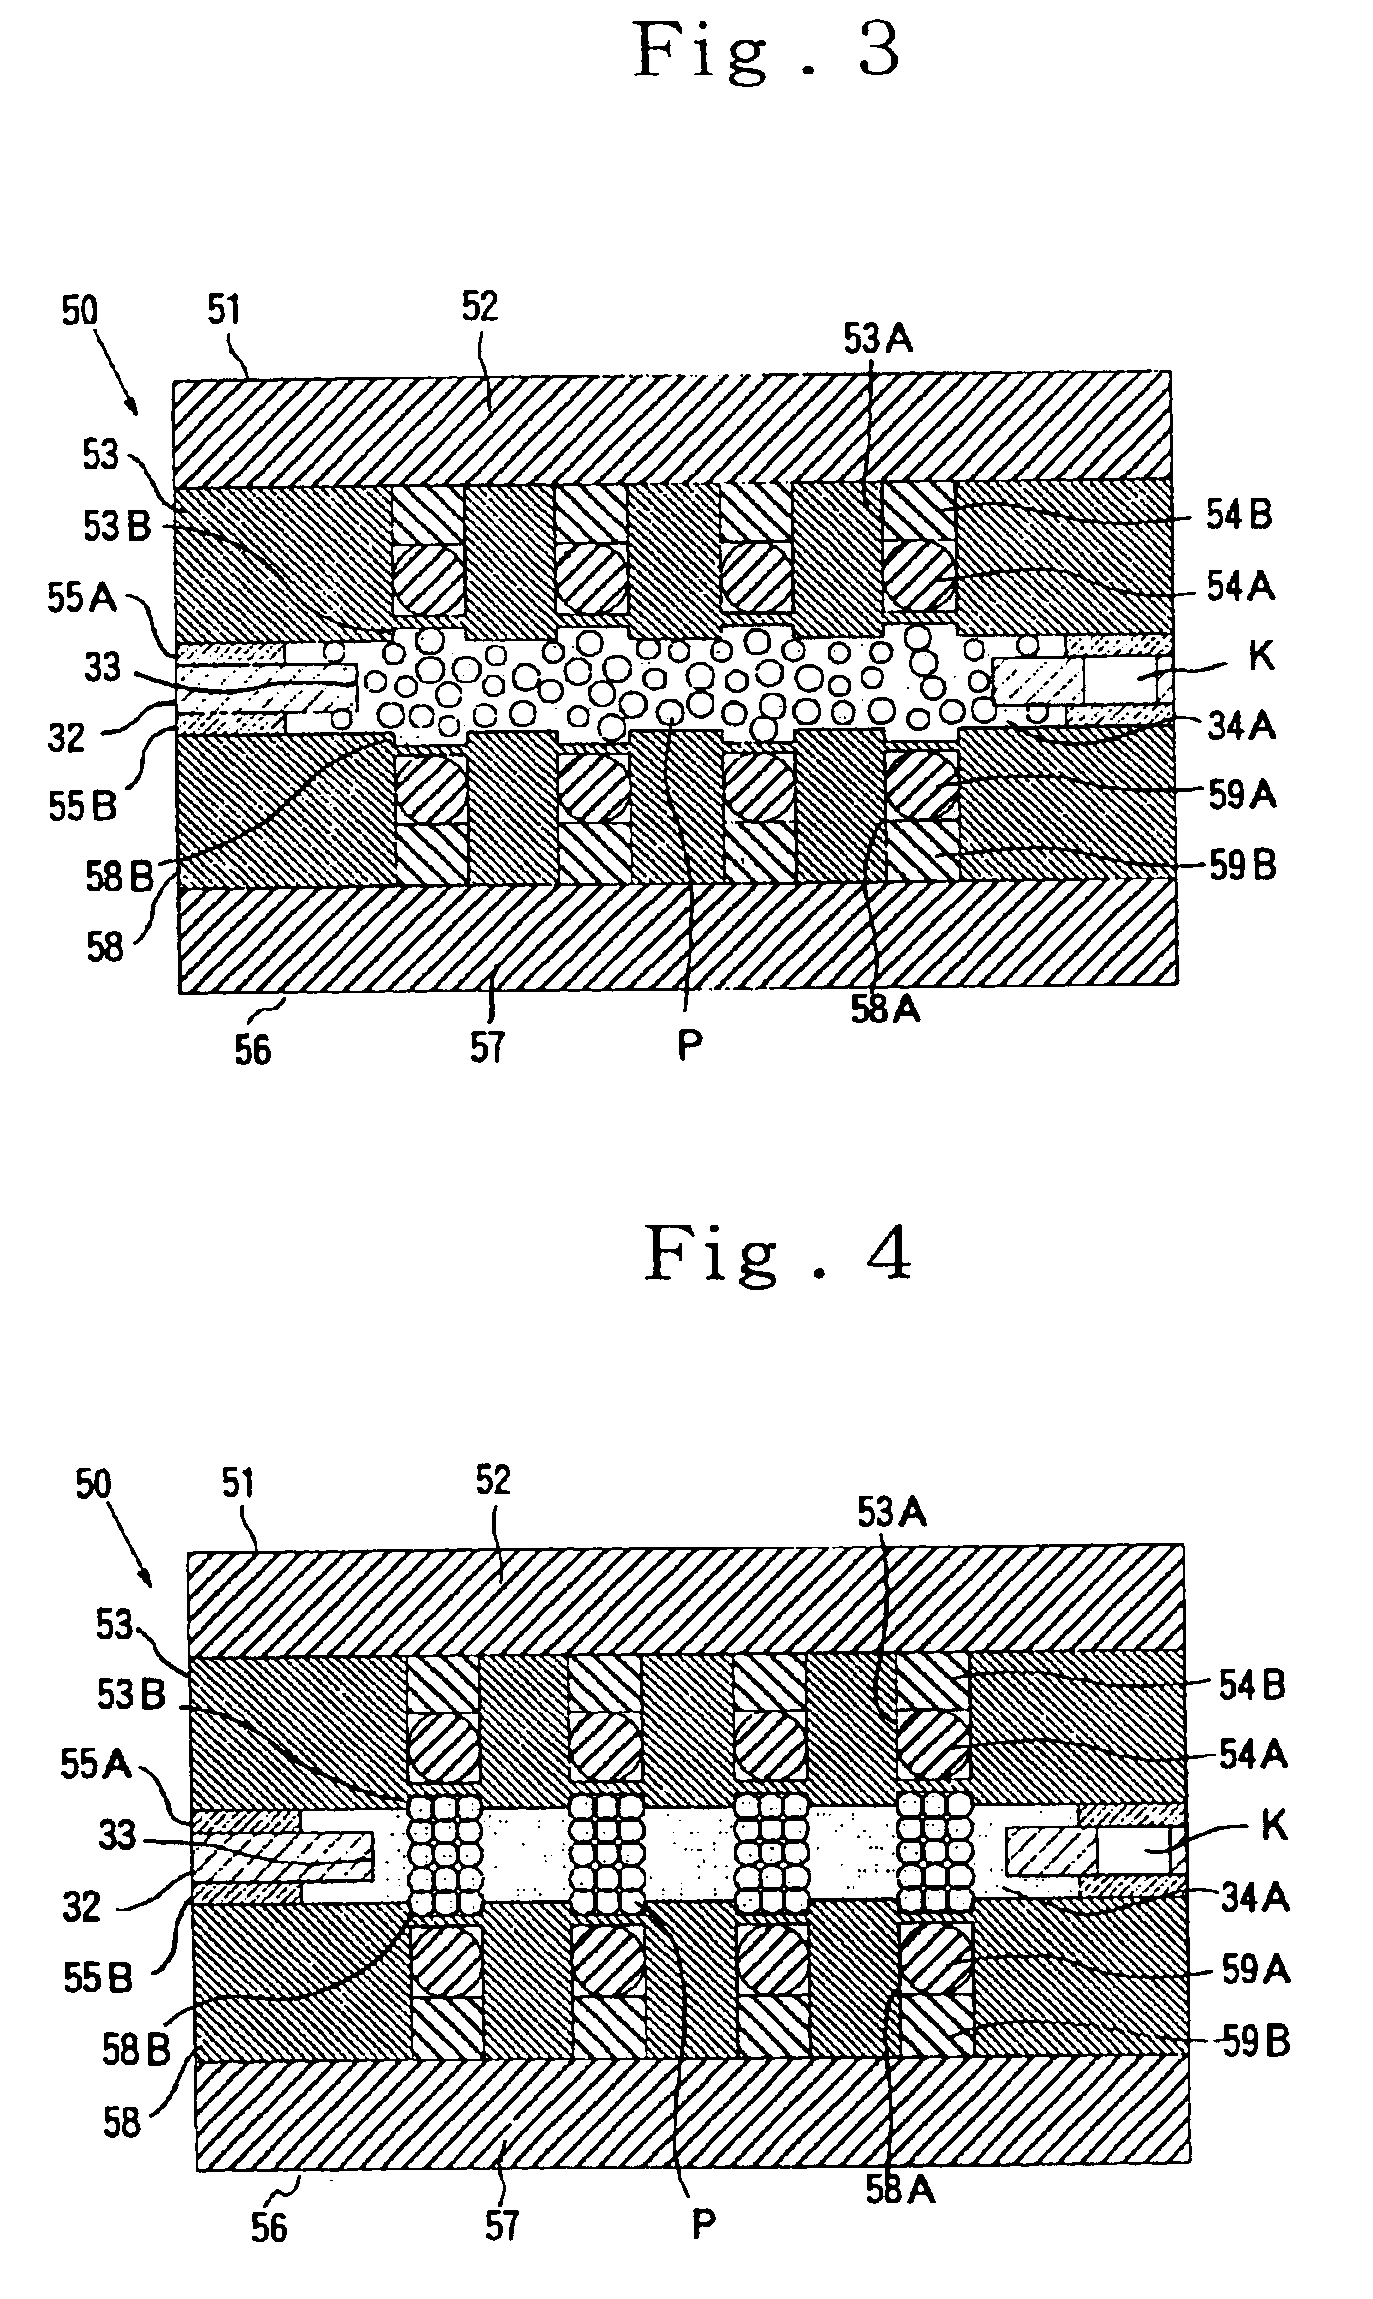 Anisotropic conductive sheet and wafer inspection device